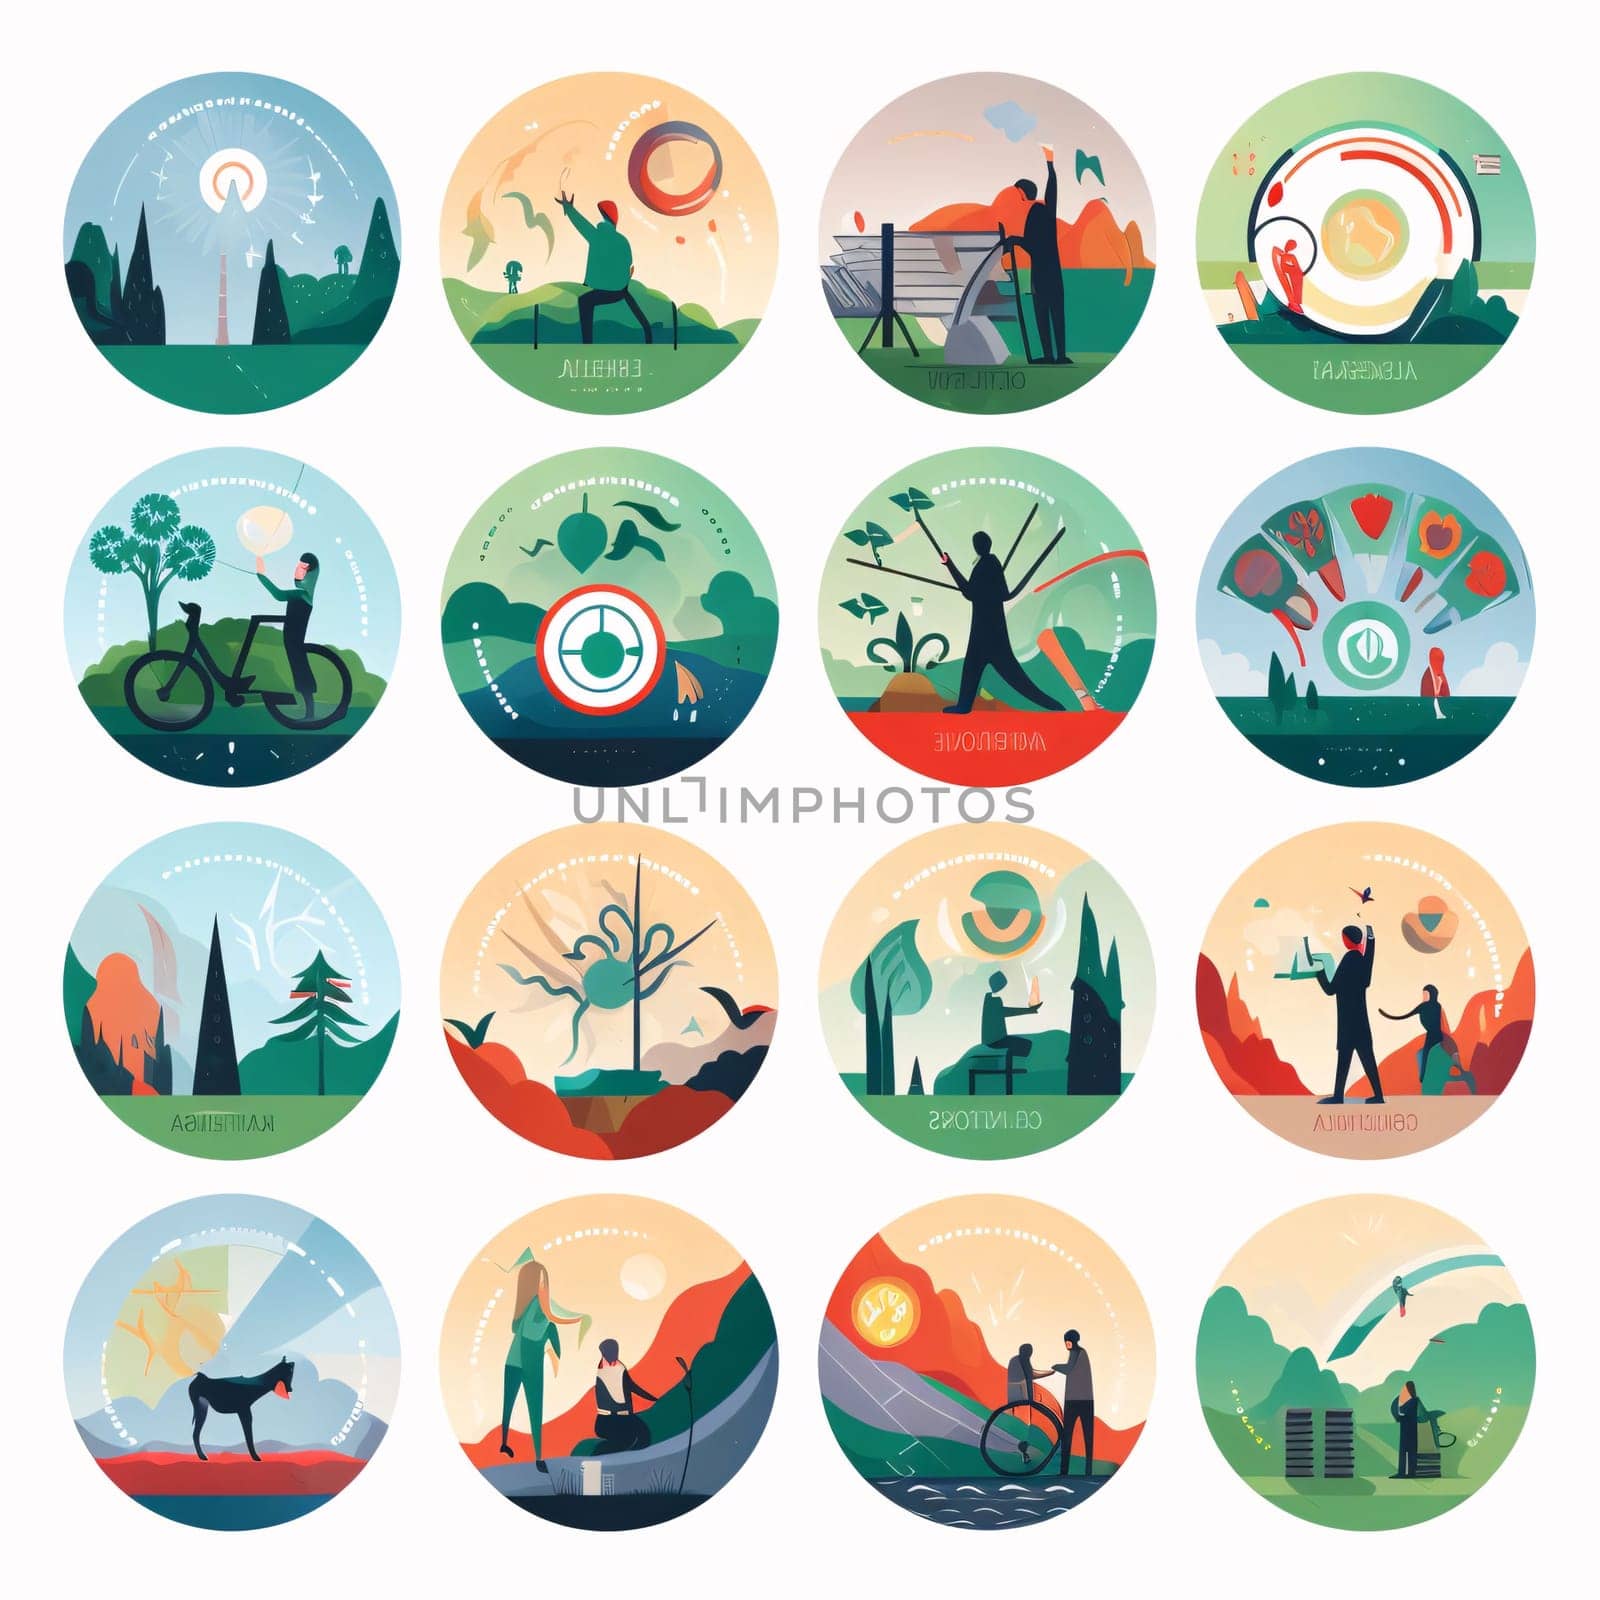 New icons collection: Flat icons set of outdoor activities in flat style. Vector illustration